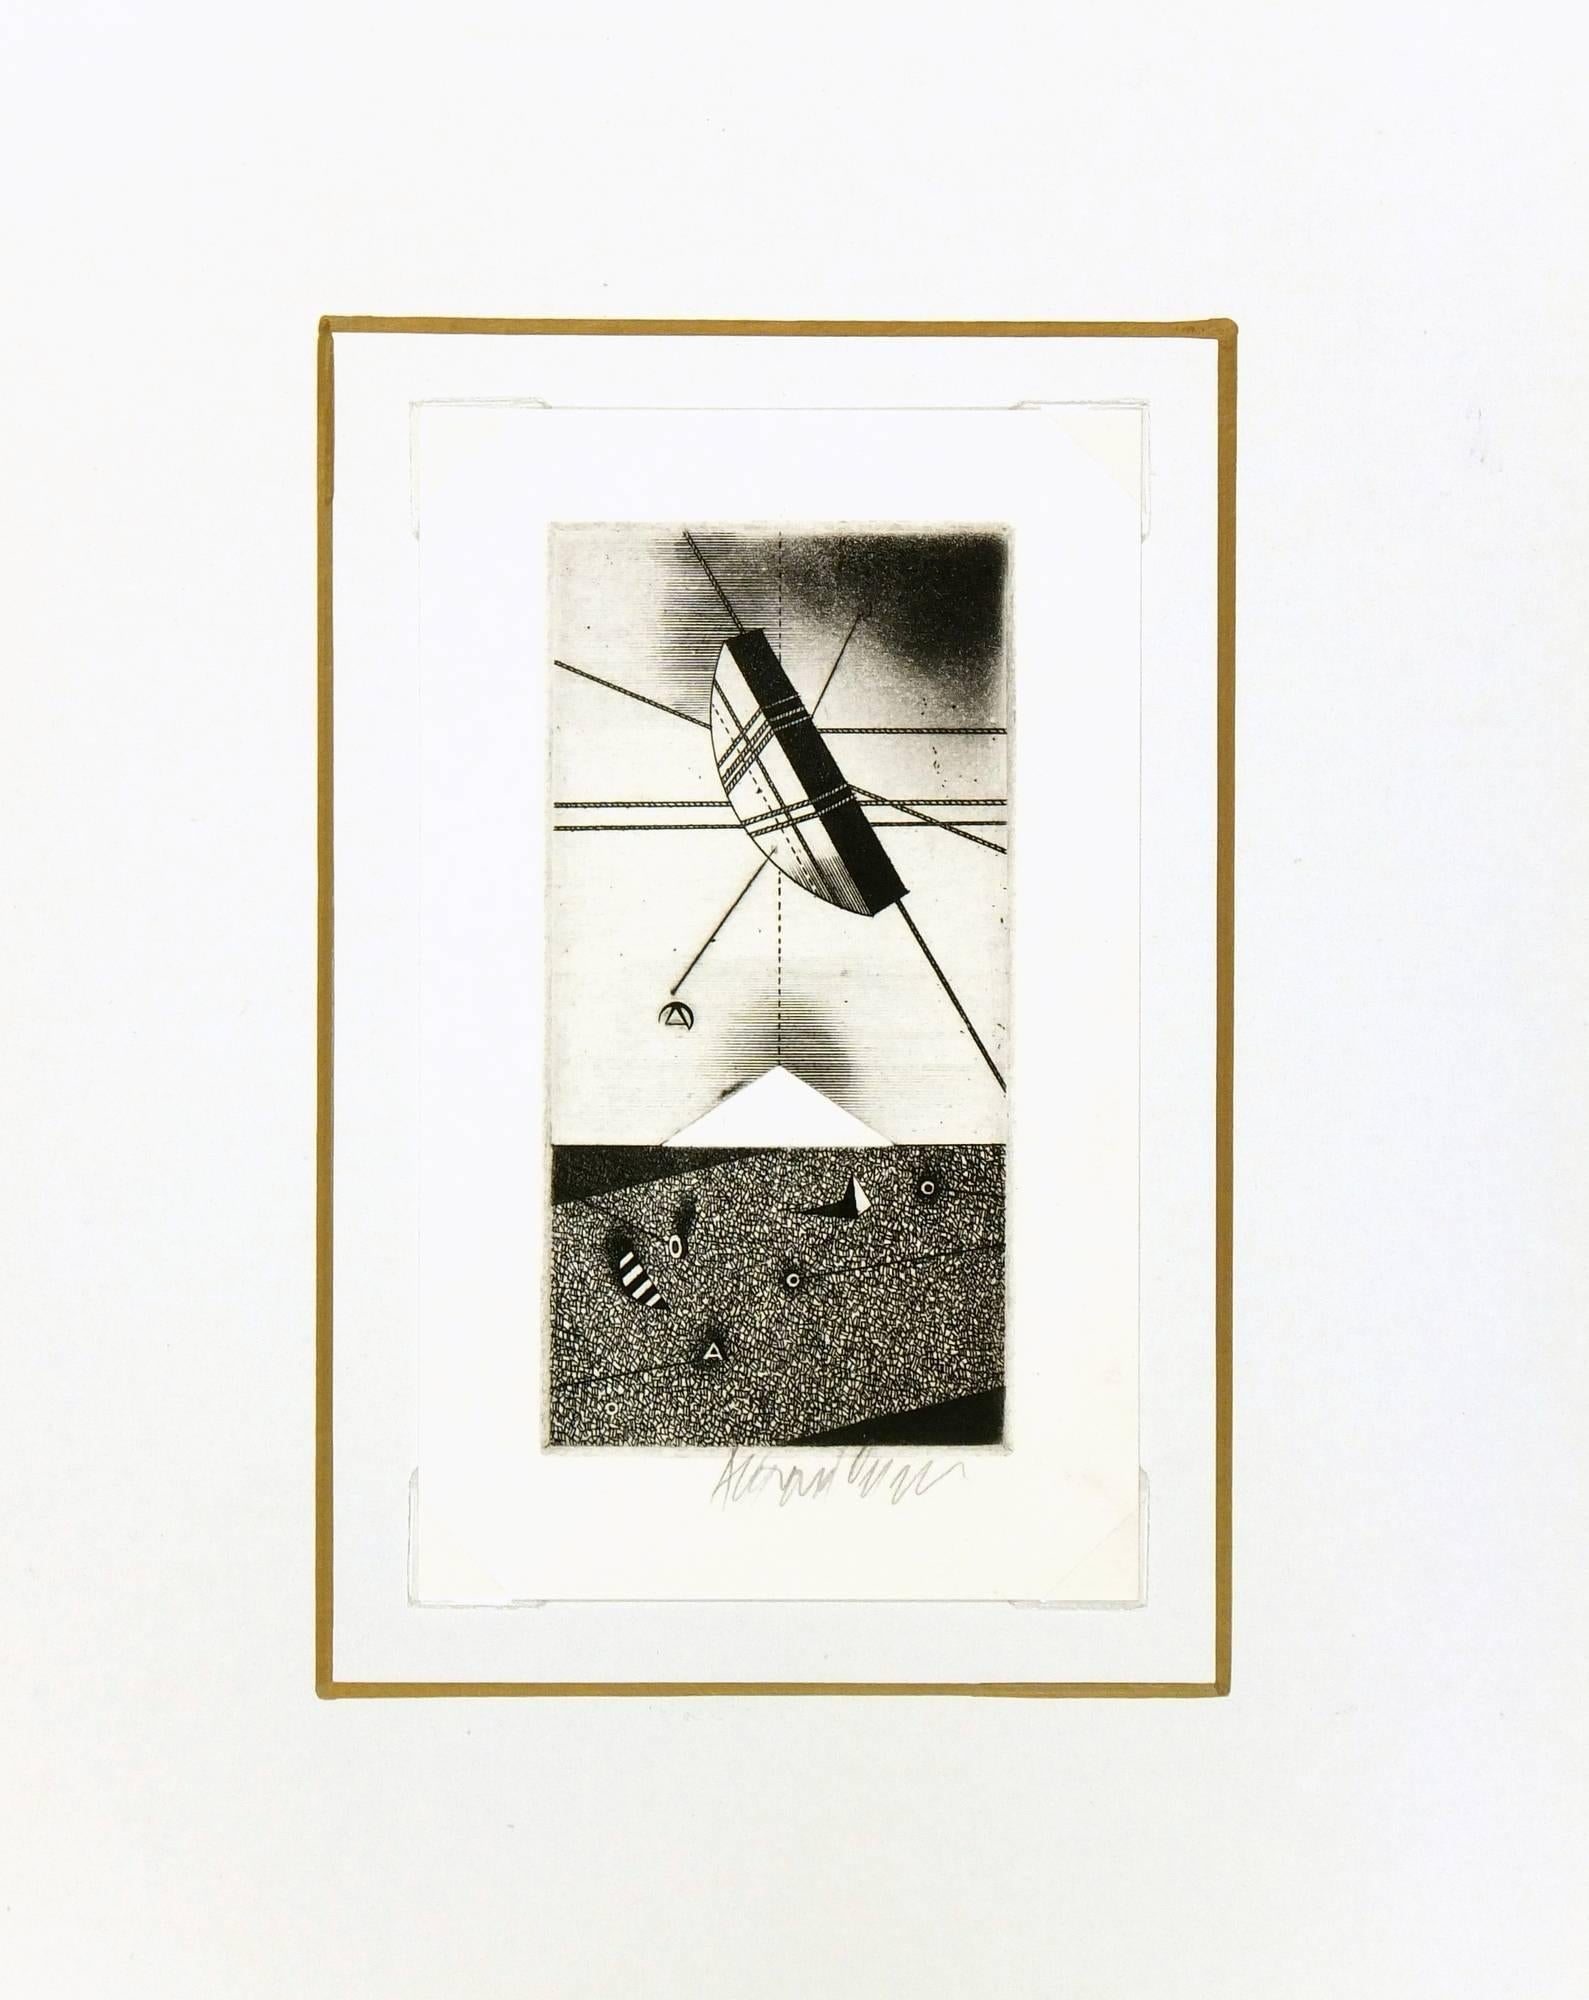 Abstract modern aquatint etching in black and white, circa 1960.  Signed lower right.     

Original artwork on paper displayed on a white mat with a gold border. Mat fits a standard-size frame.  Archival plastic sleeve and Certificate of